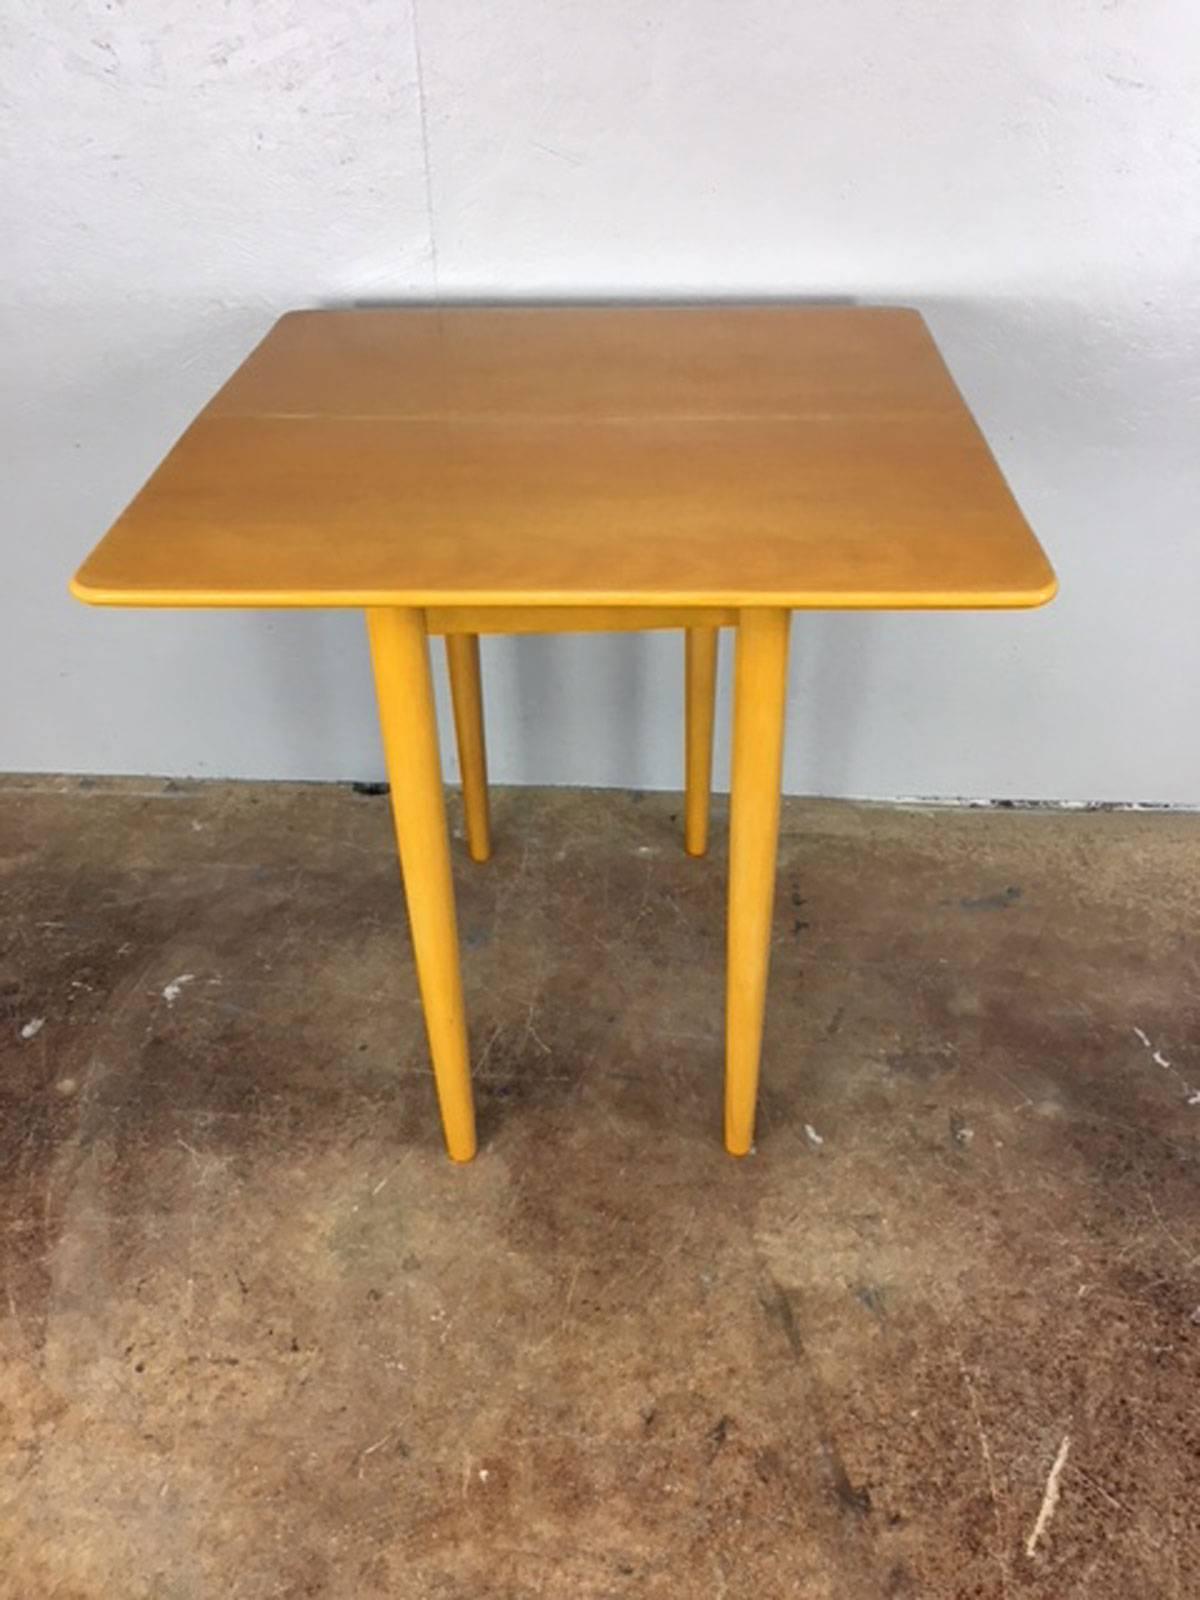 Unique Heywood Wakefiled folding top game or dining table for smaller spaces. Original acquisition condition. Solid maple. This table is in very useable original acquisition condition or easy to refinish if desire a perfect finish. Without the